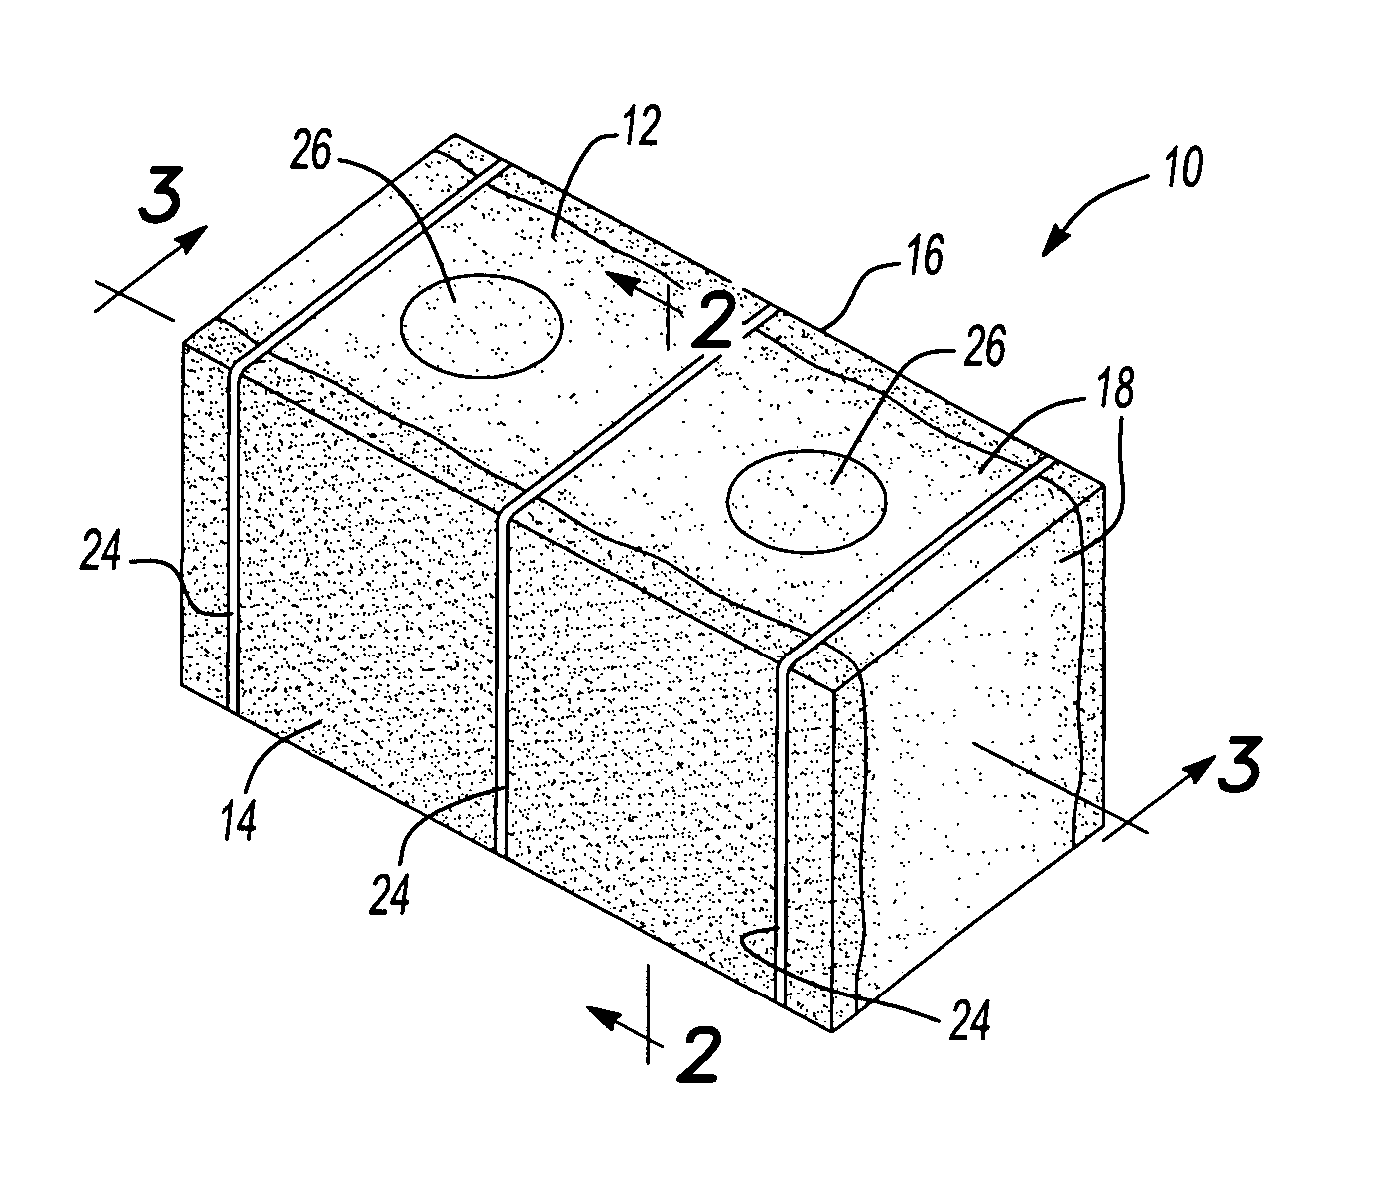 Culm block and method for forming the same